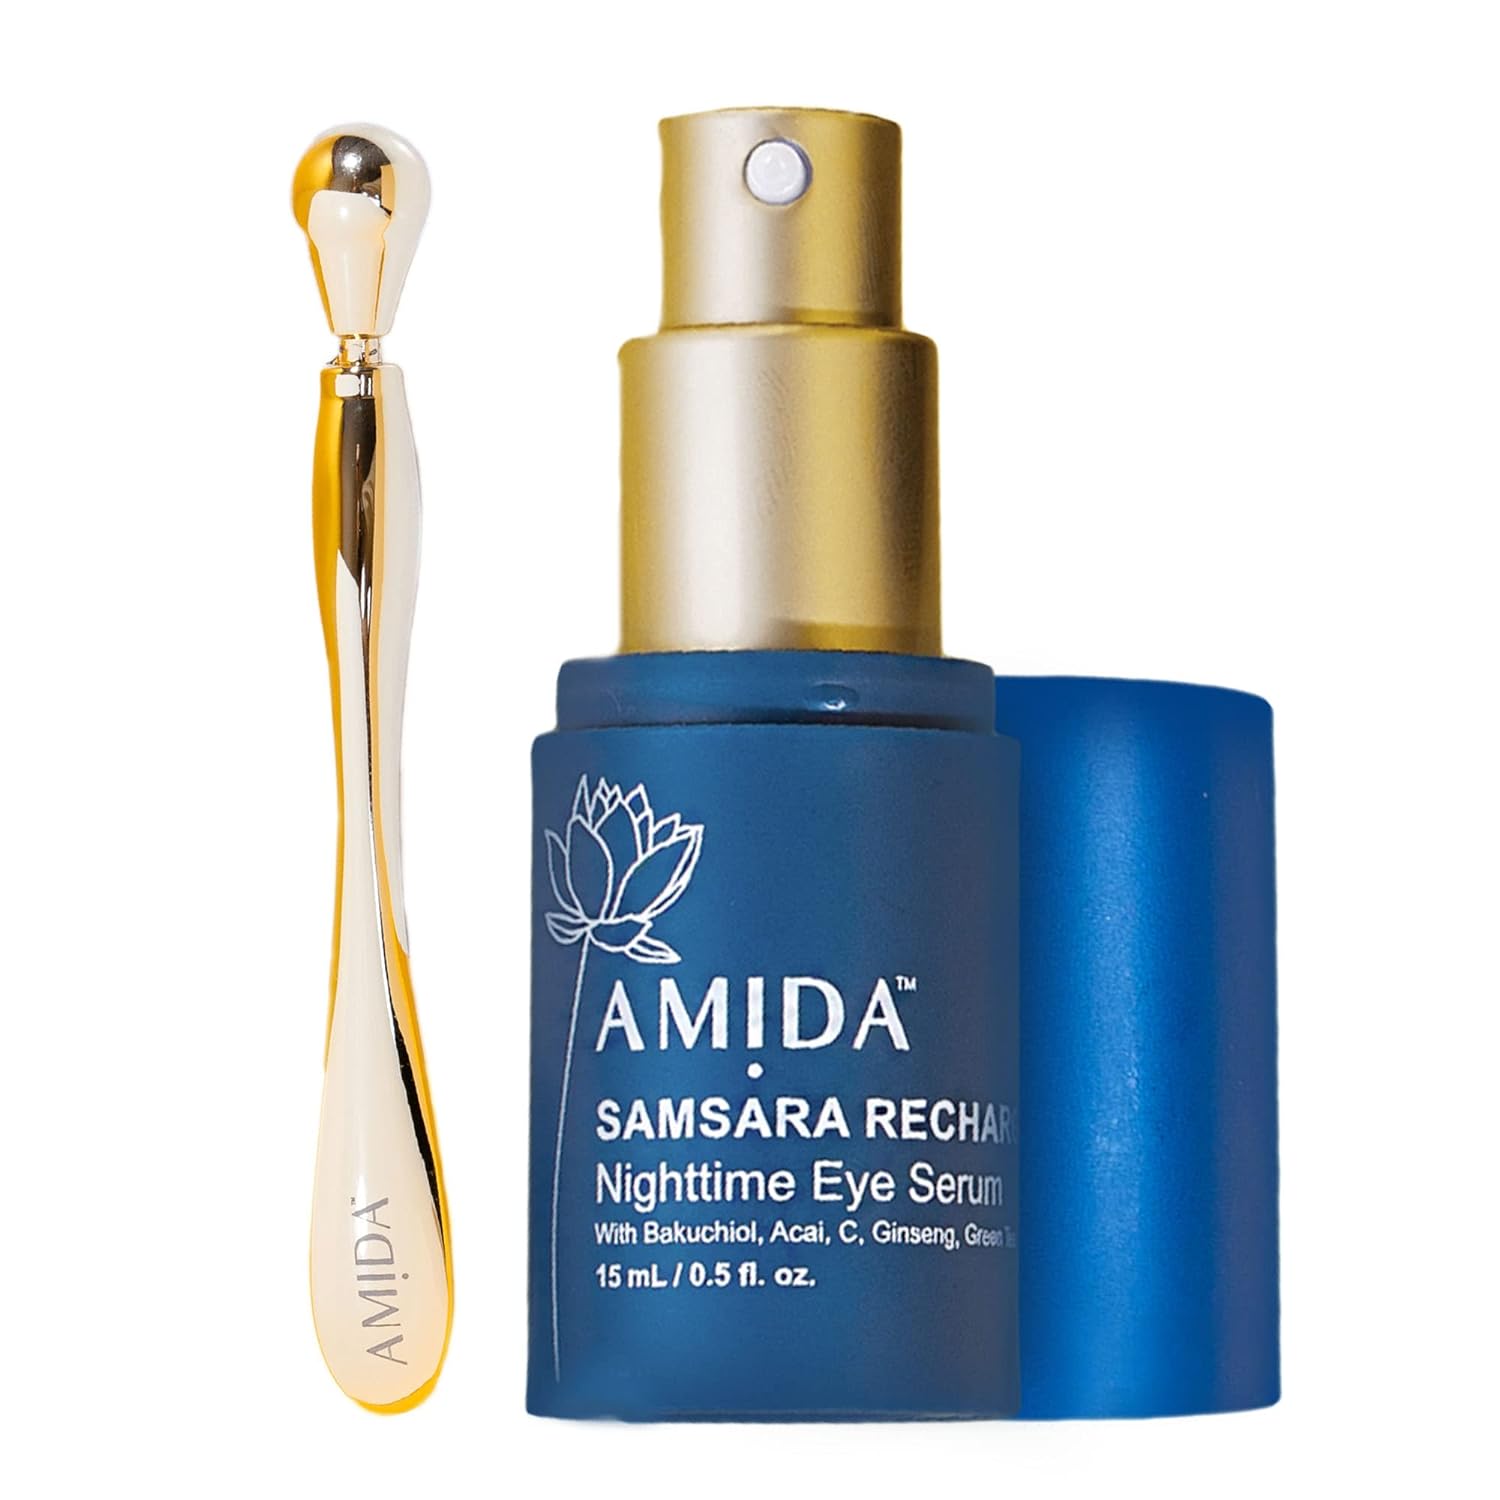 AMIDA PURE Nighttime Eye Cream with Included Eye Massager, Anti Aging Eye Serum Diminishes Dark Circles, Rich in Essential Vitamins and Minerals, Reduced Puffiness, Tighter & Brighter Skin